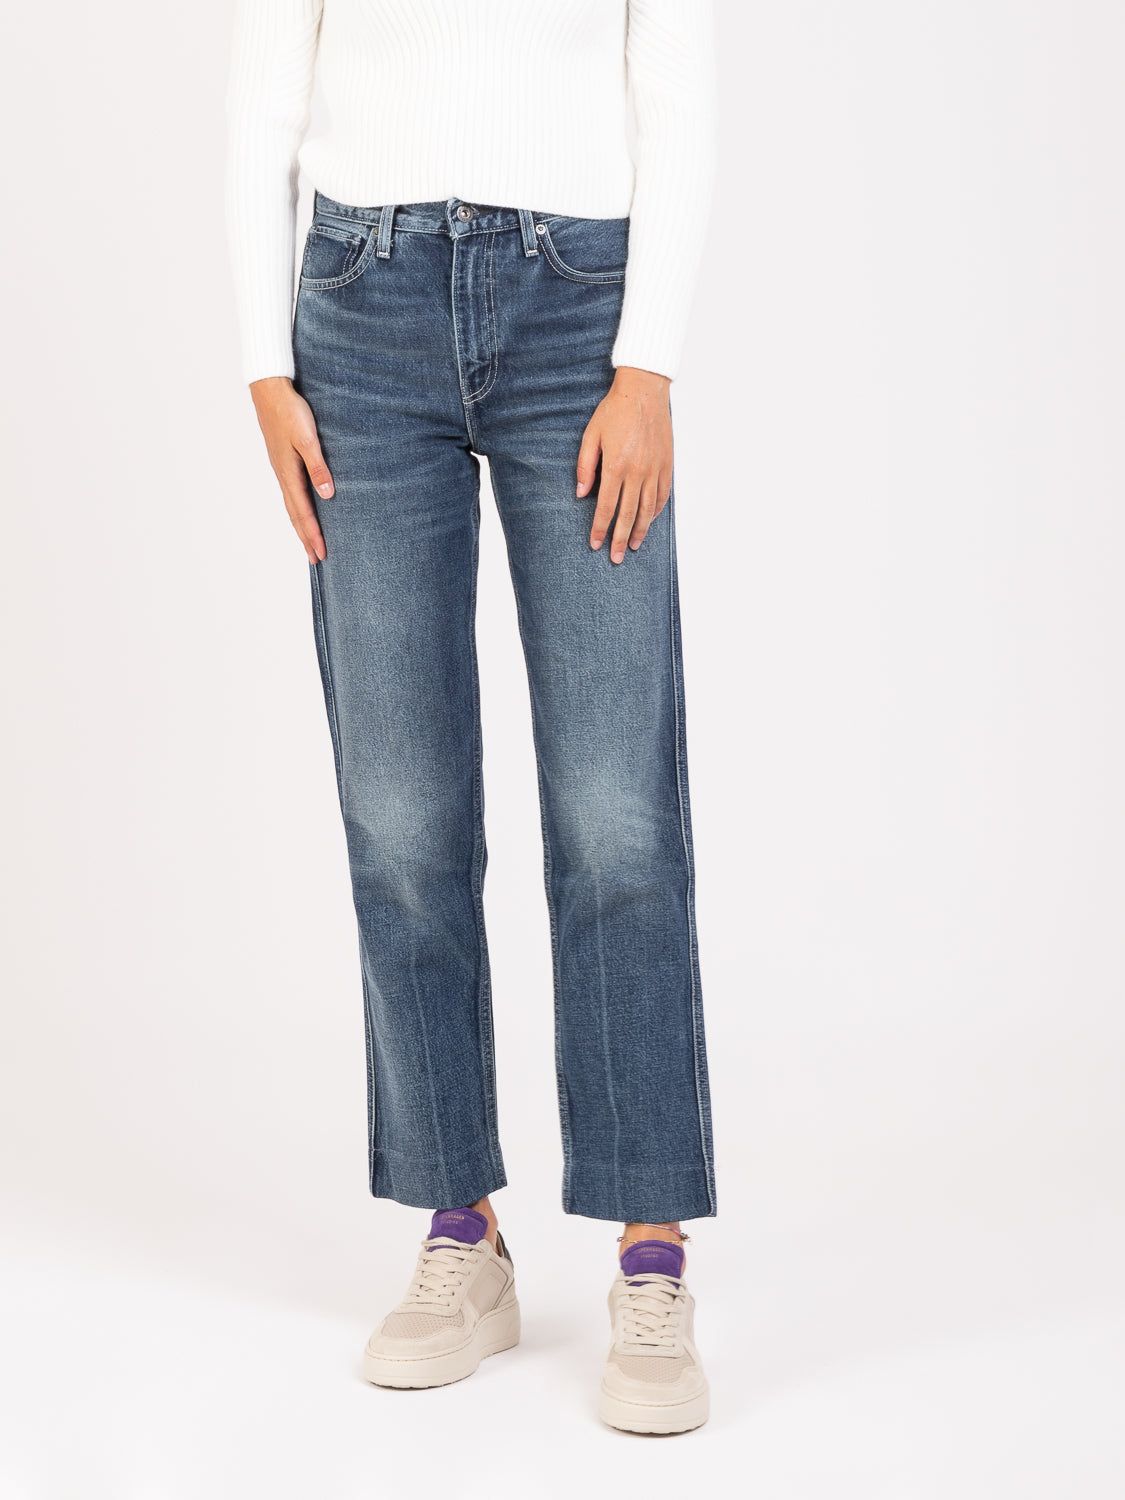 LEVI'S MADE AND CRAFTED - Jeans column taper denim medio scuro | STIMM